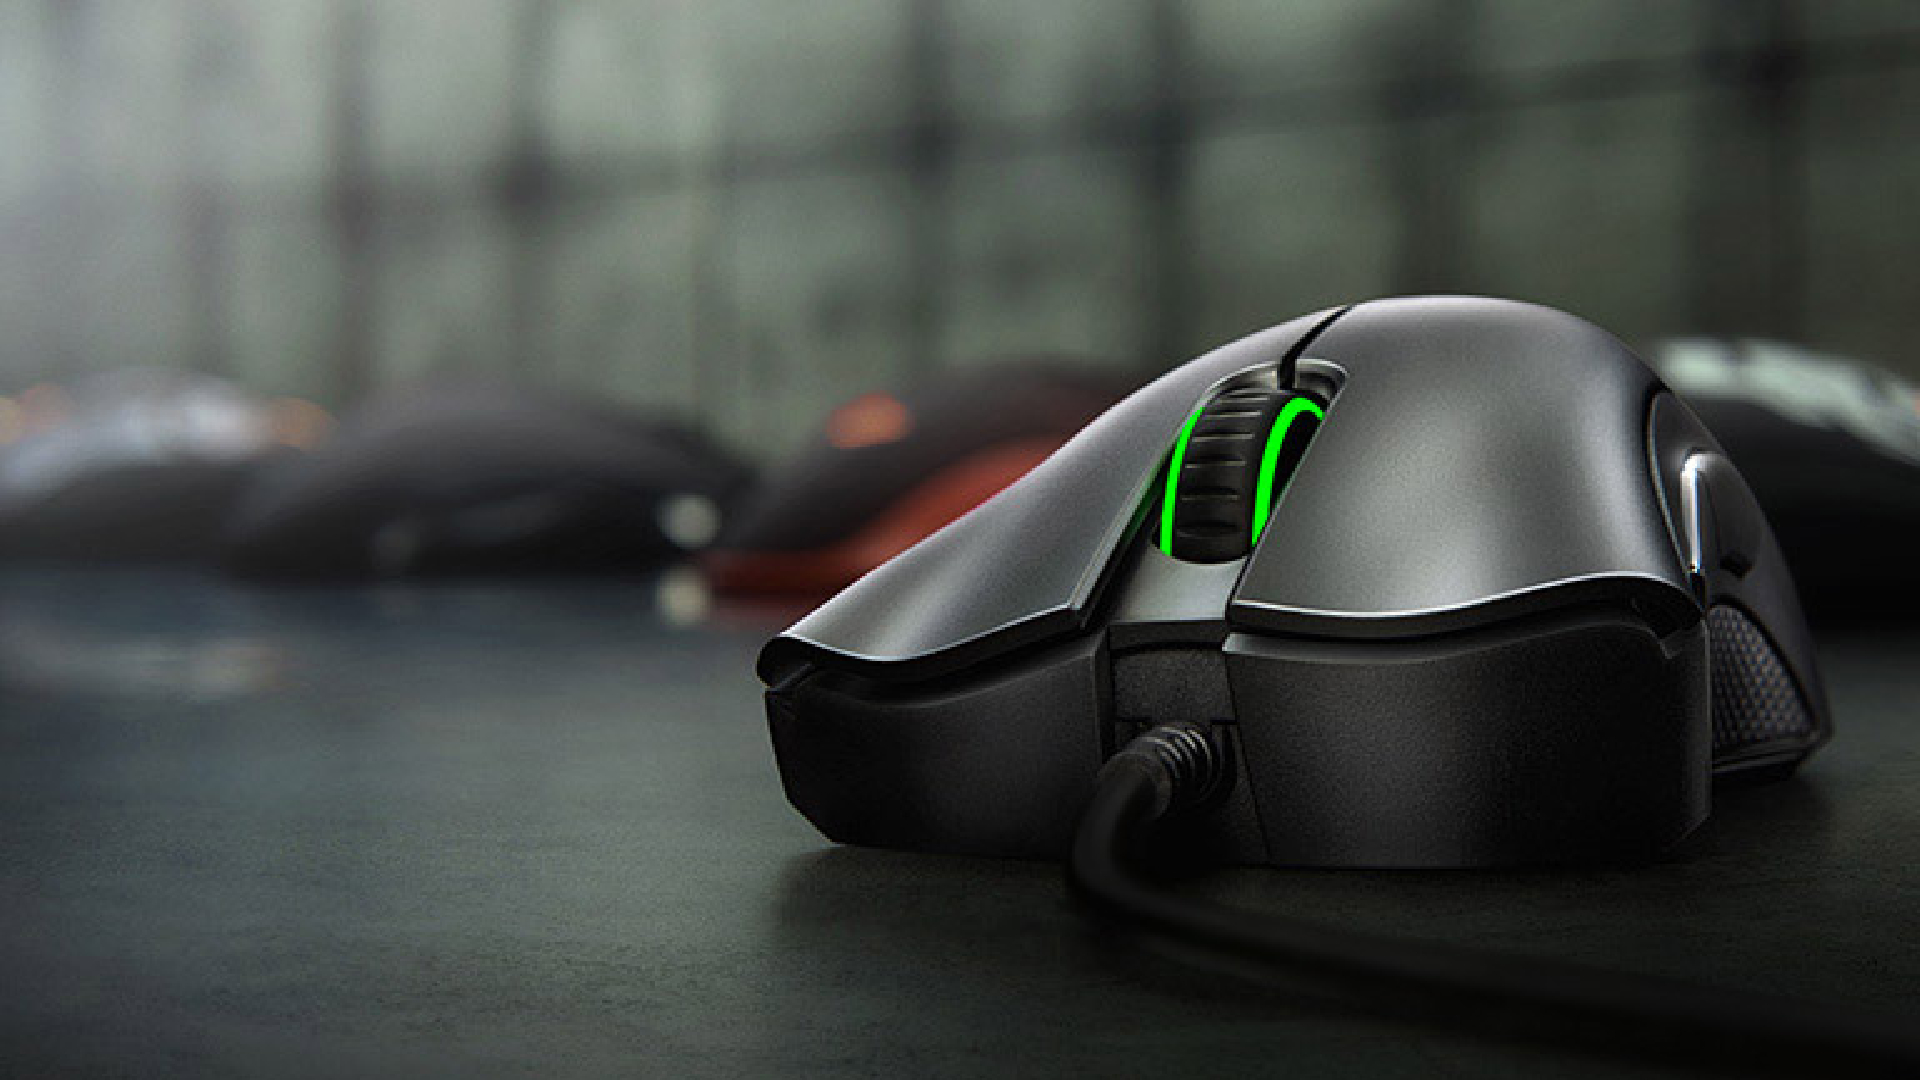 Grab Razer's DeathAdder Essential gaming mouse for under $20